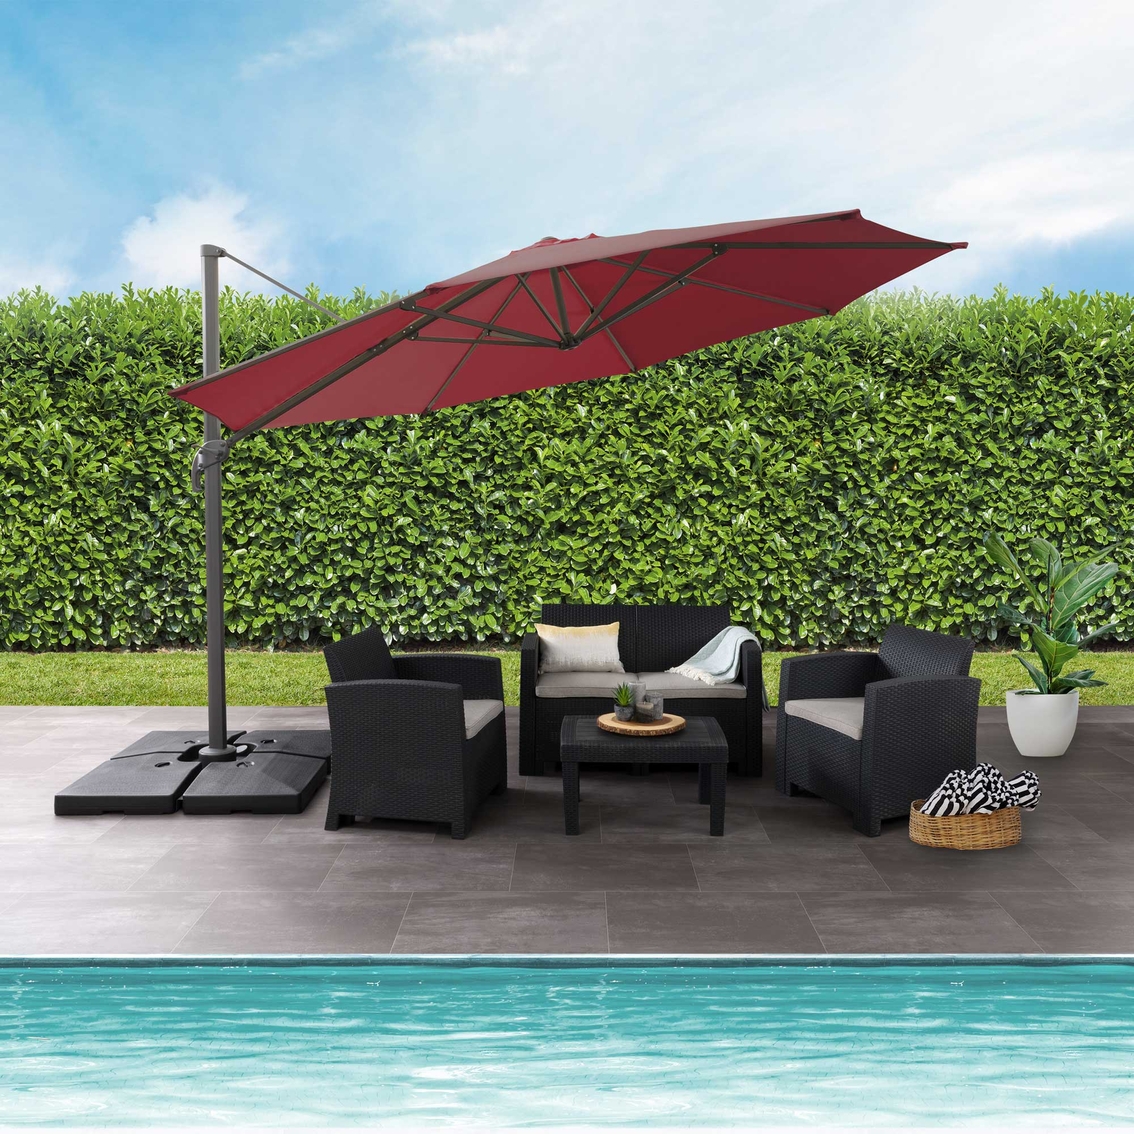 CorLiving PPU-540-Z1 11.5 ft. Deluxe Offset Patio Umbrella and Base - Image 4 of 4